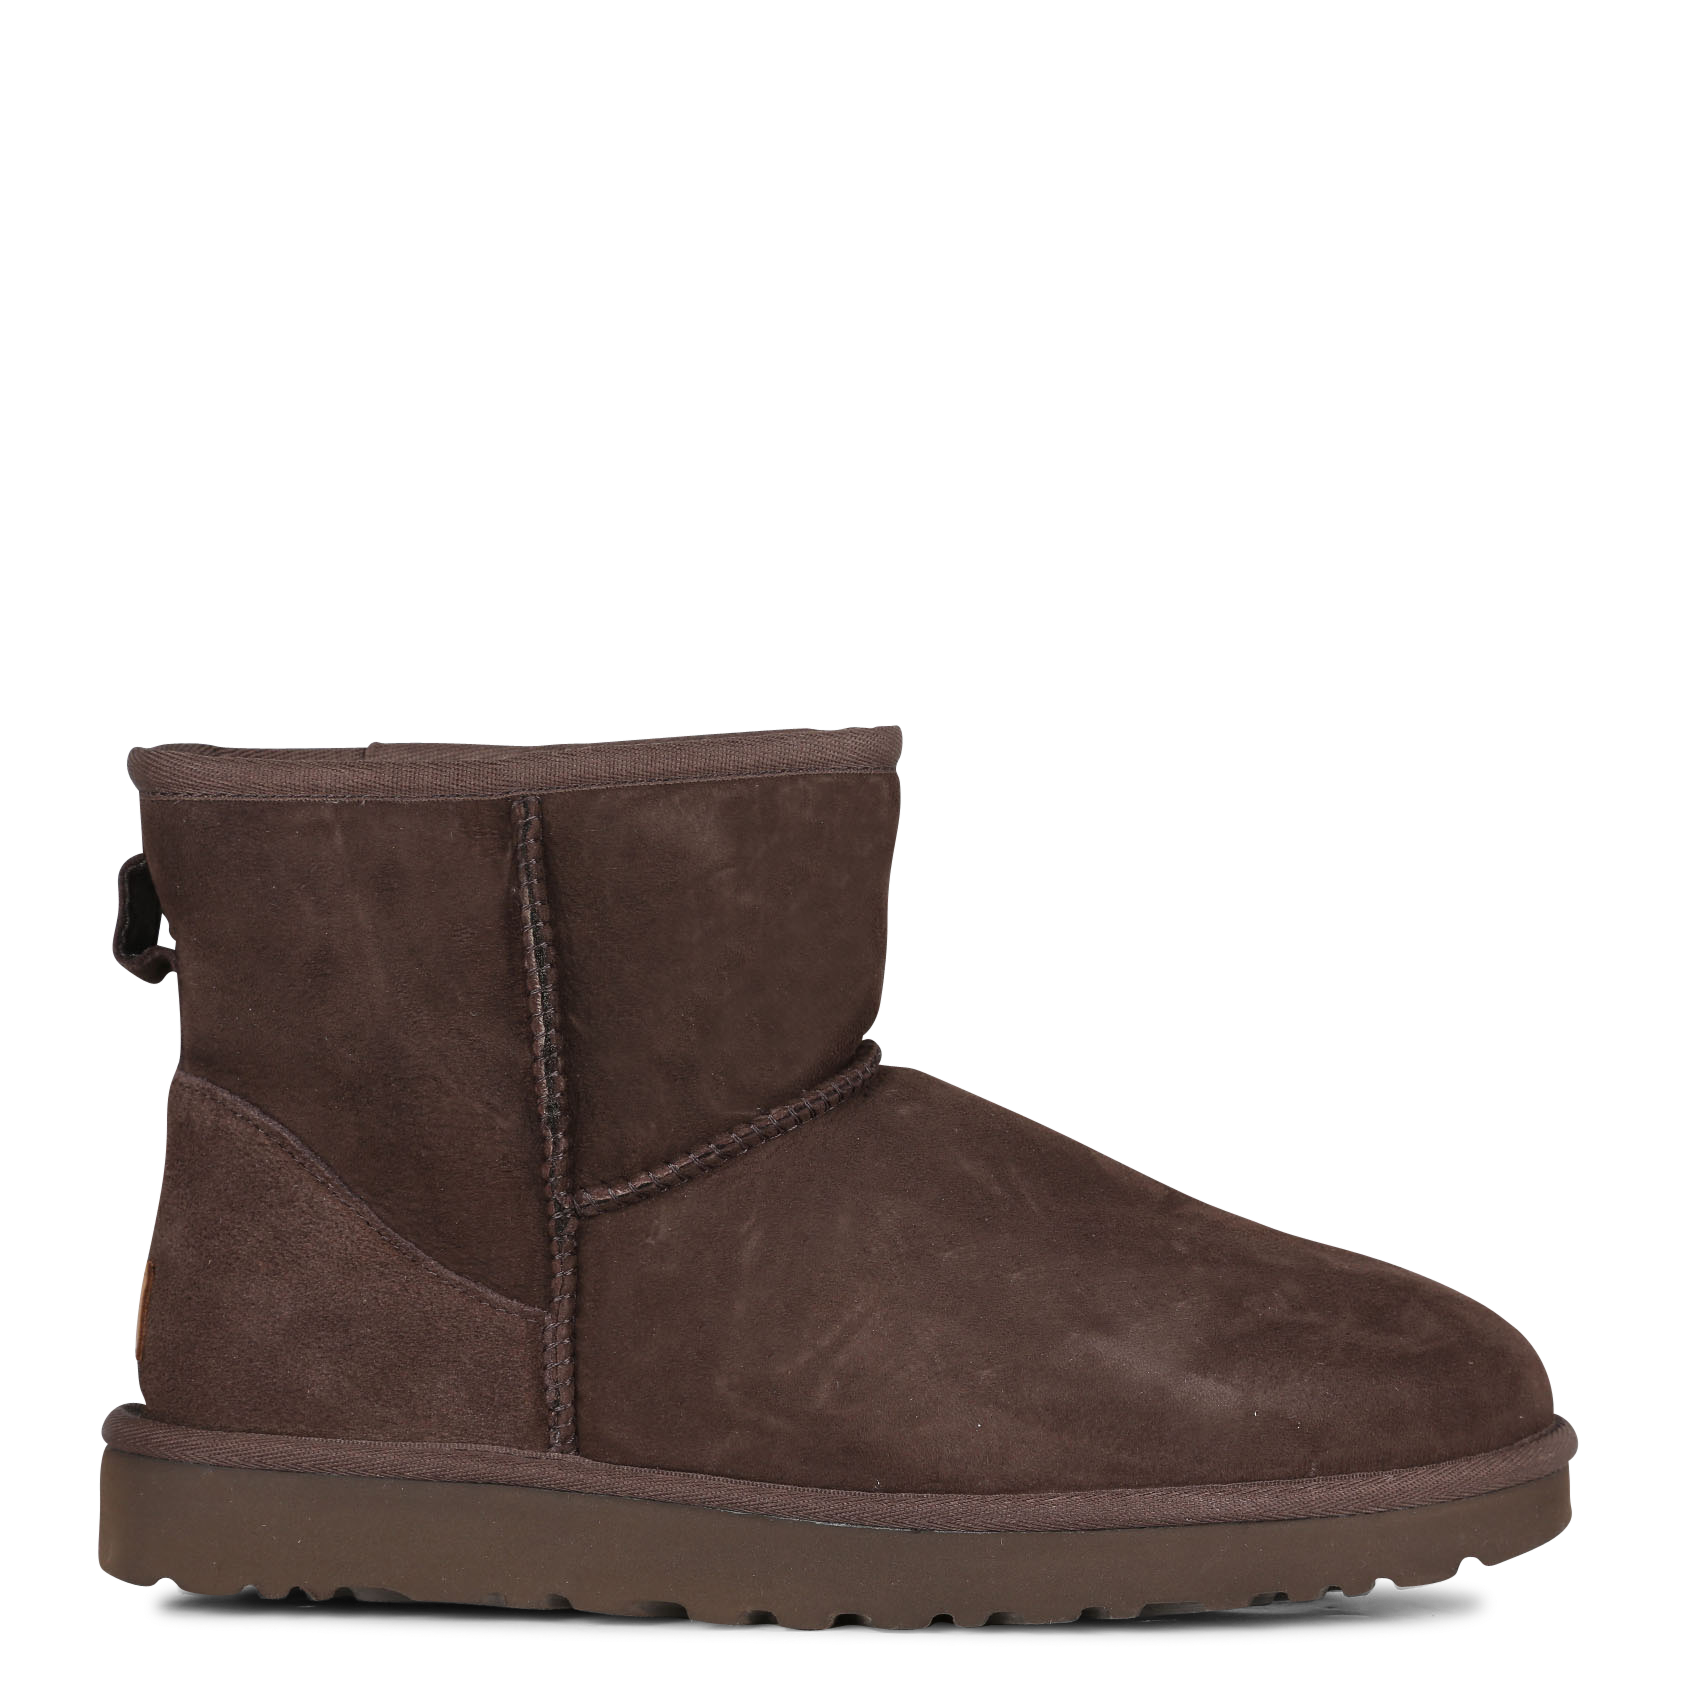 ugg boots uk stores